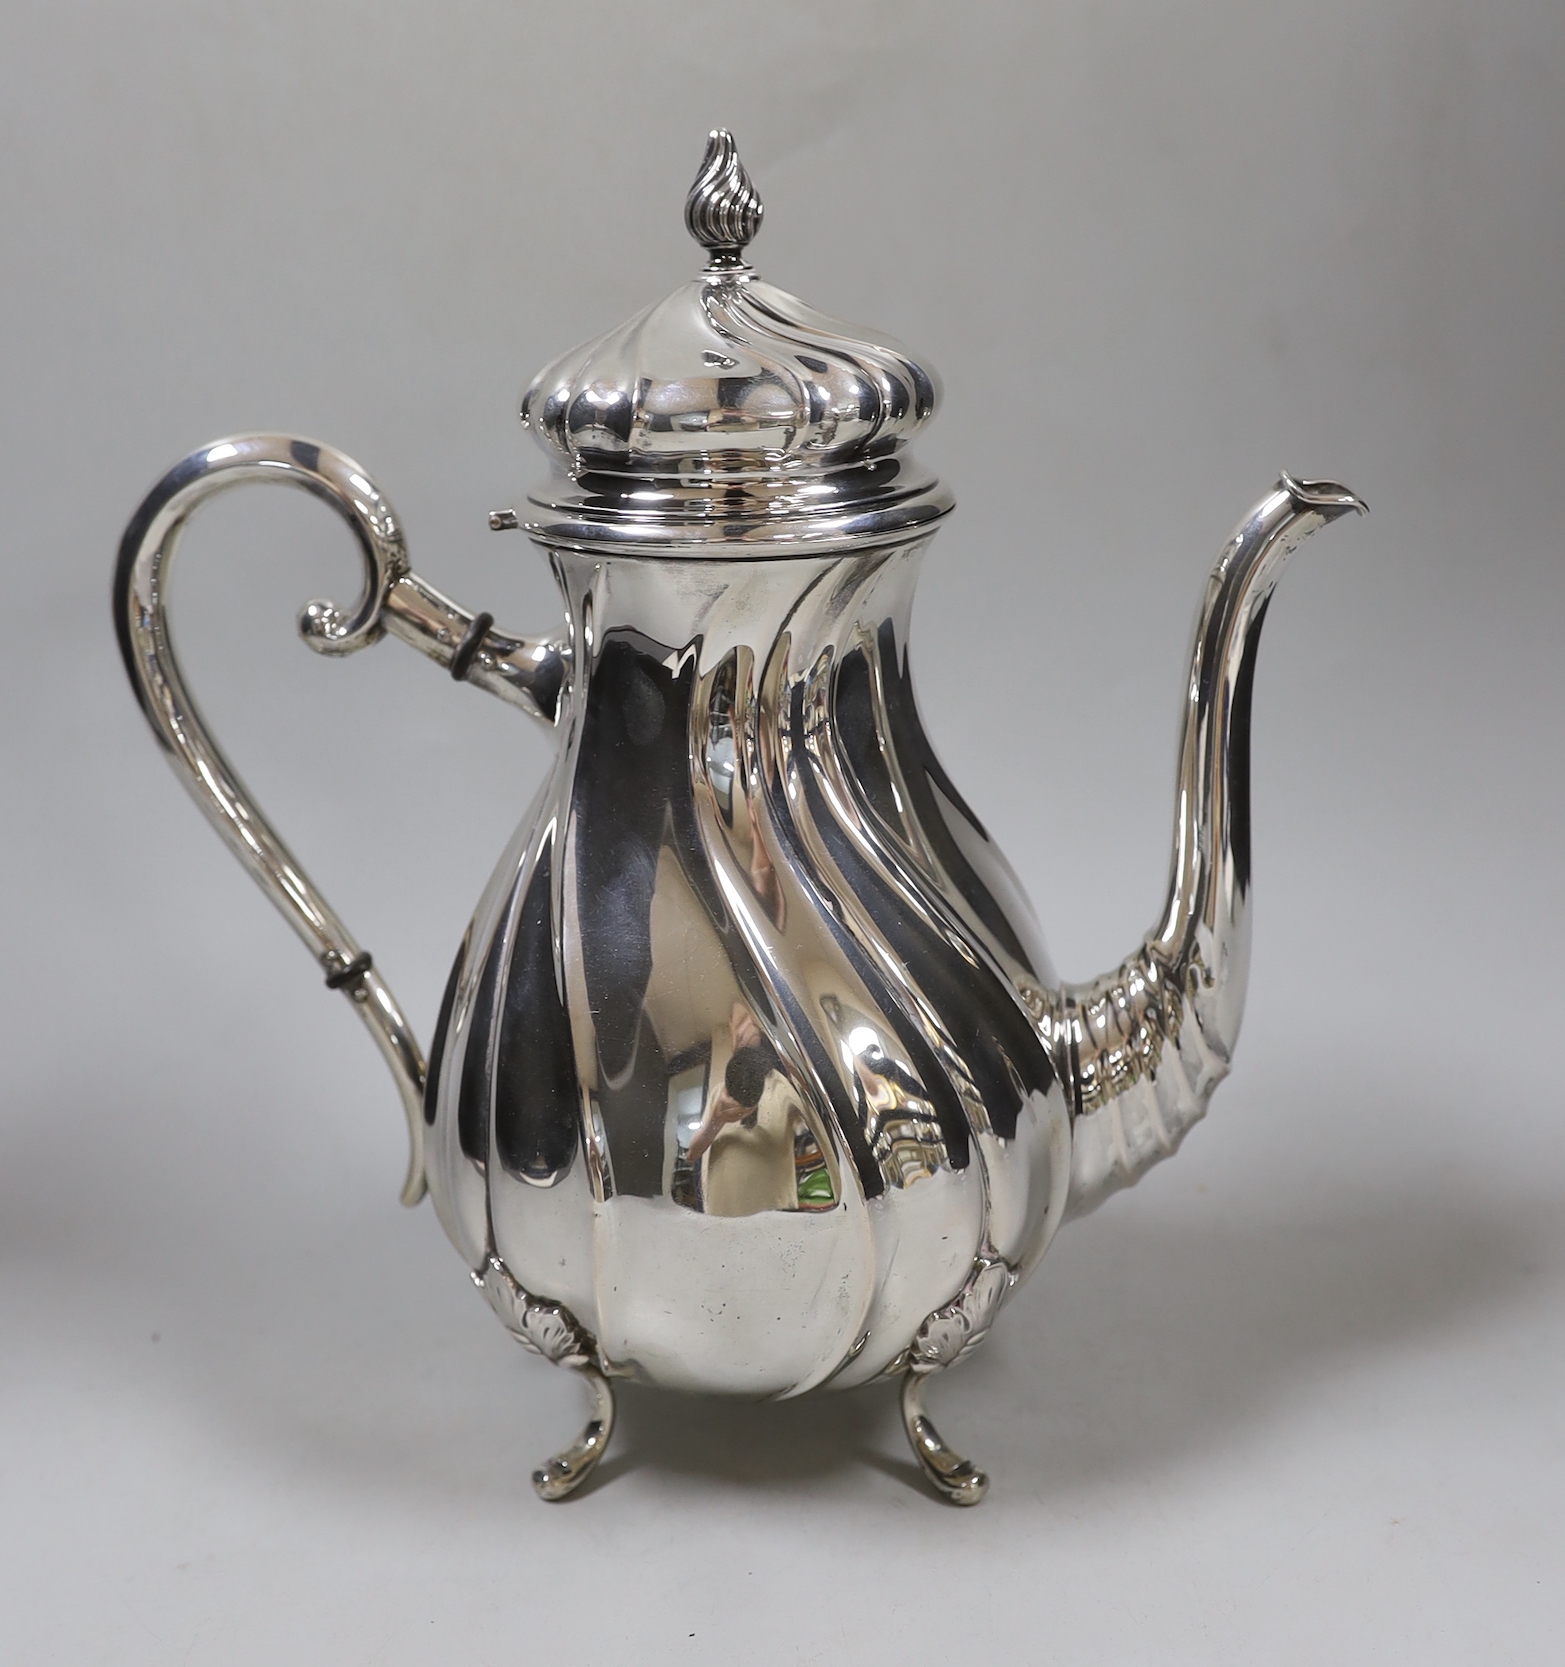 An early 20th century Danish white metal coffee pot, dated for 1917, height 27.6cm, gross weight 21.6oz.